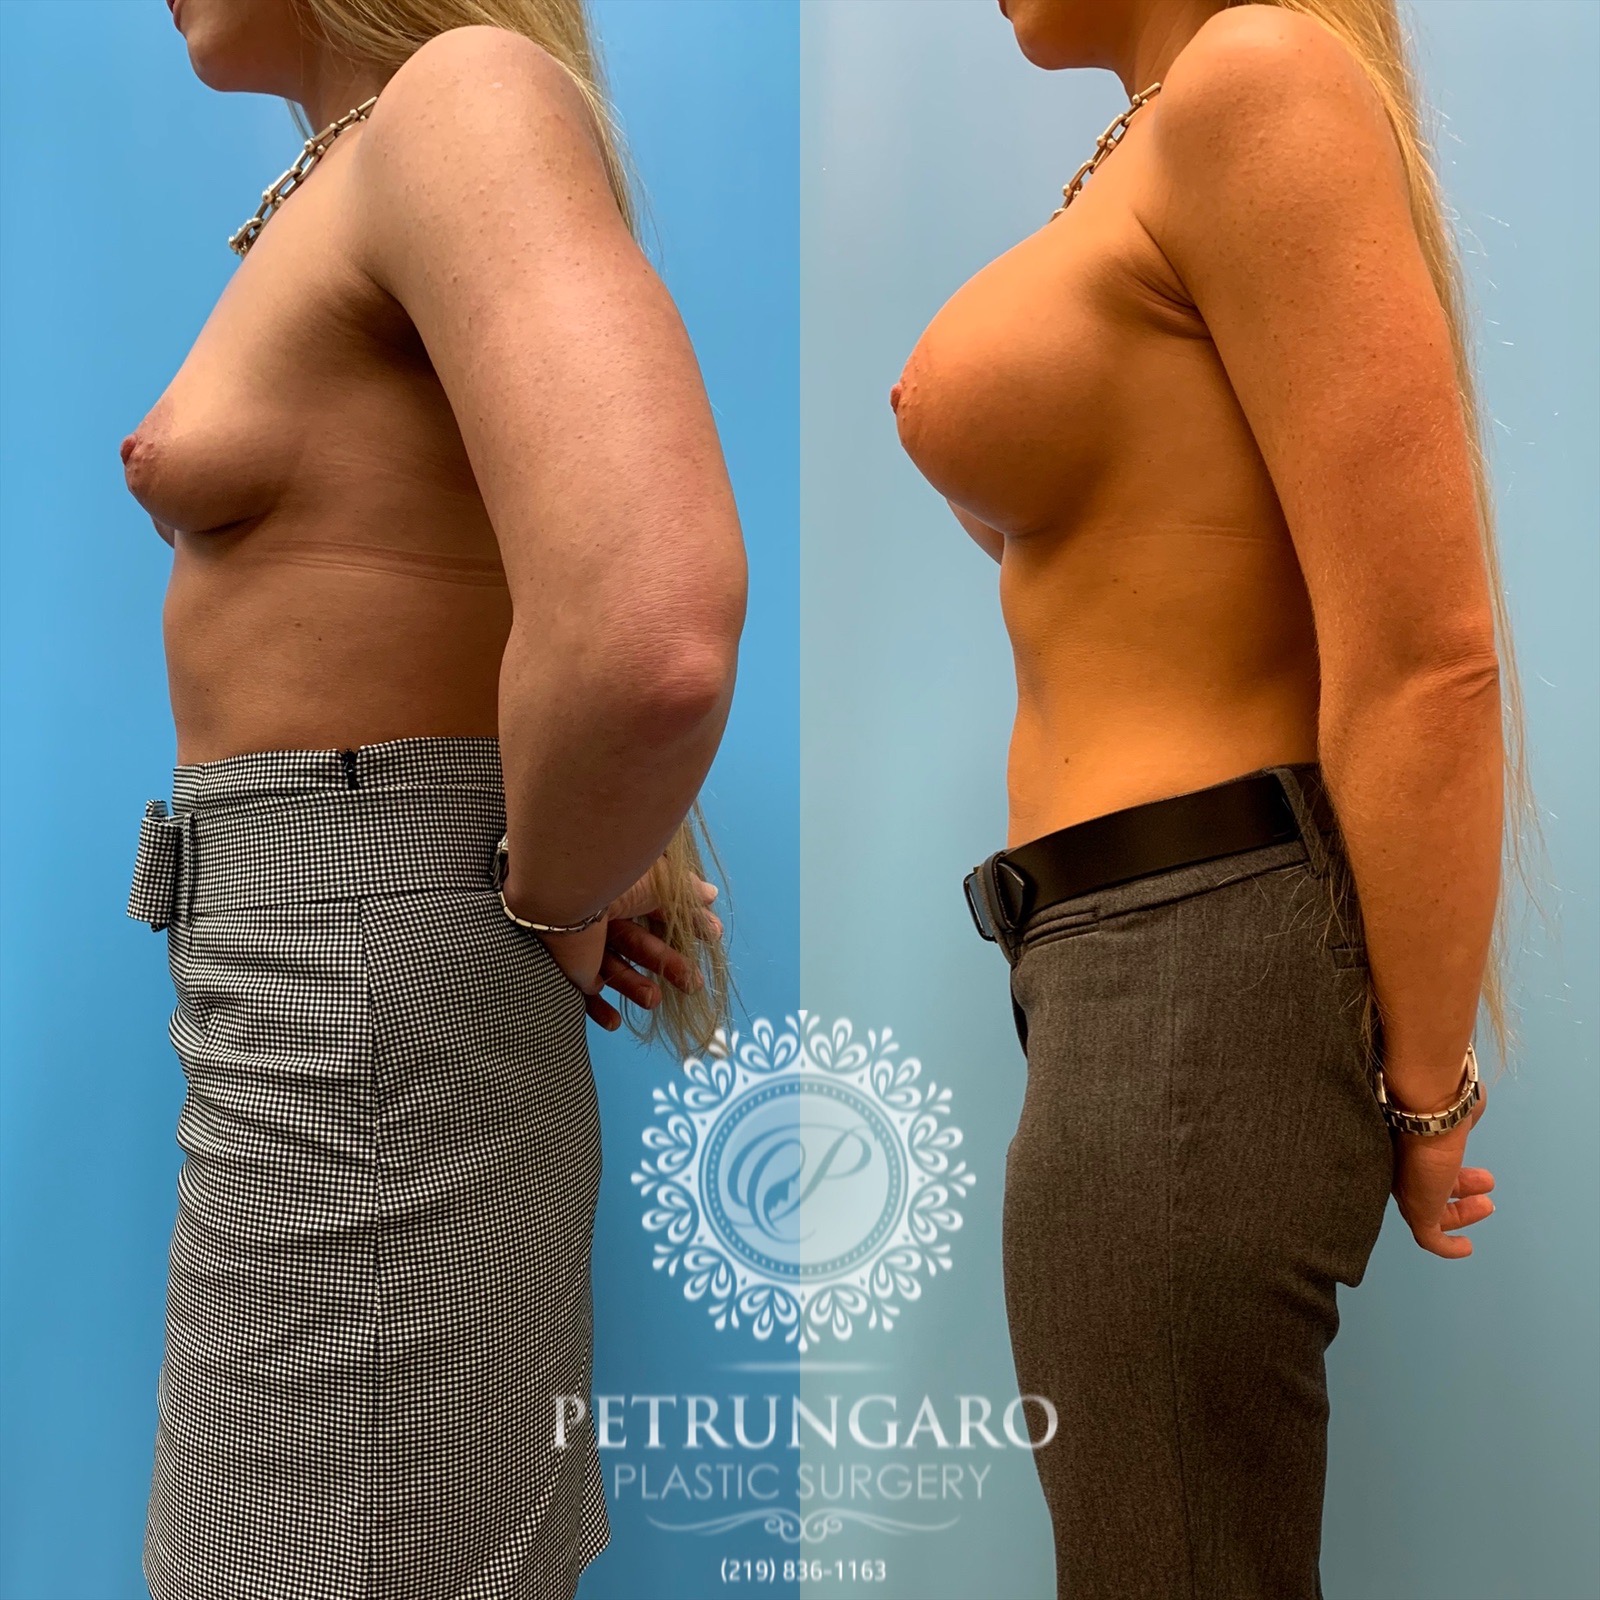 31 year old woman 3 months after breast augmentation-2